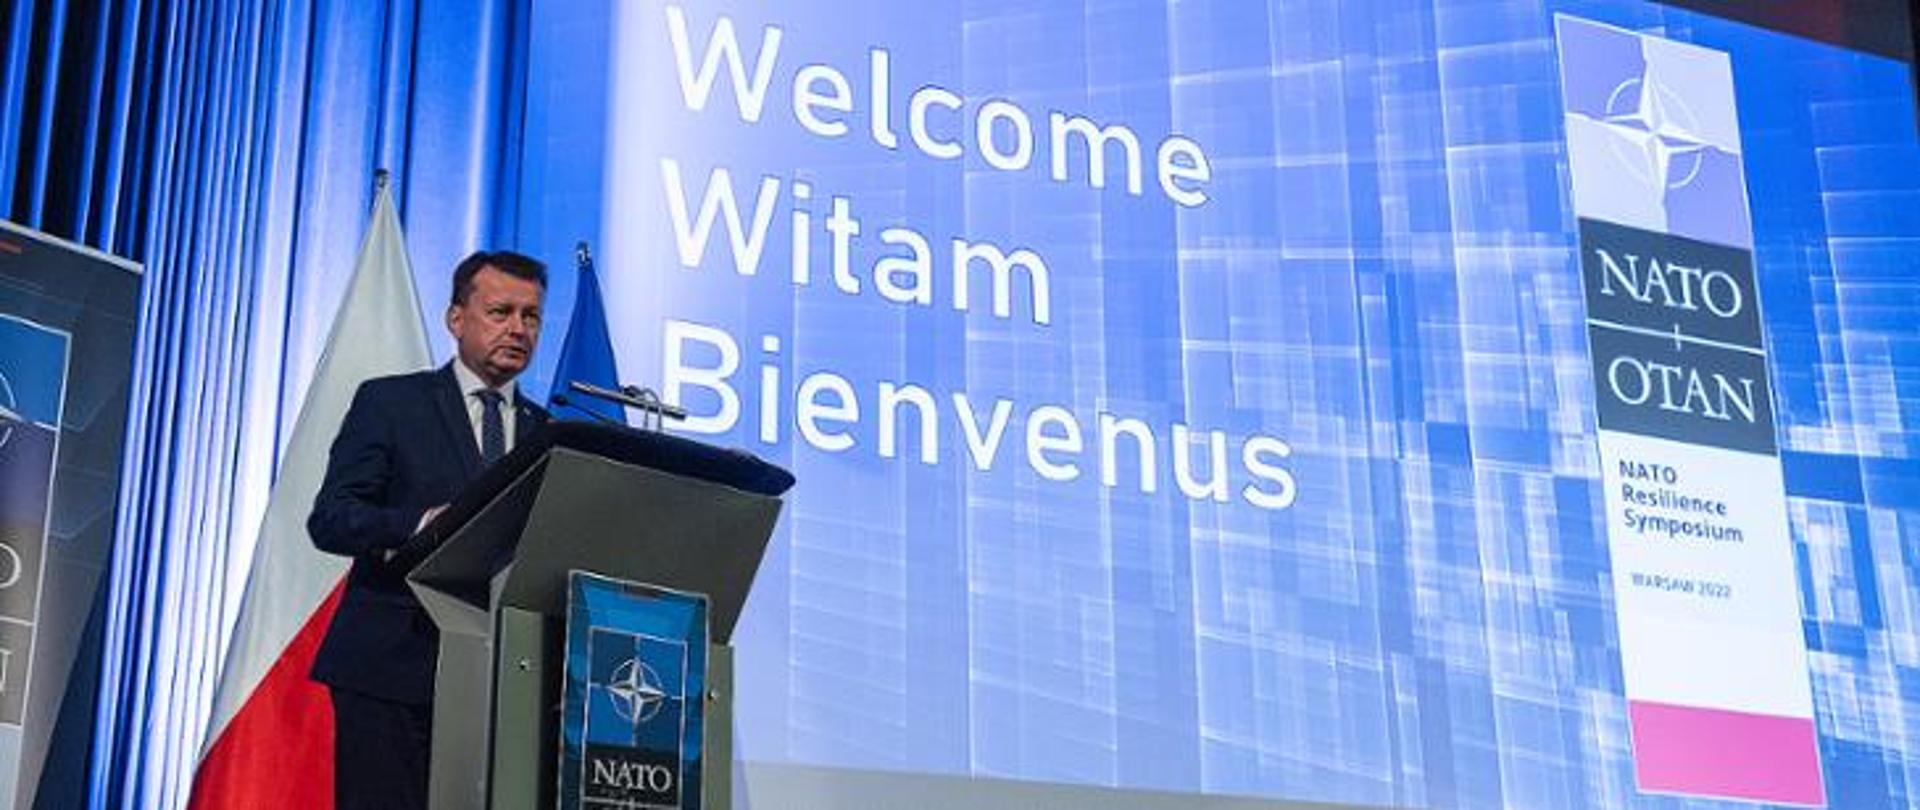 NATO Resilience Symposium in Warsaw_2022